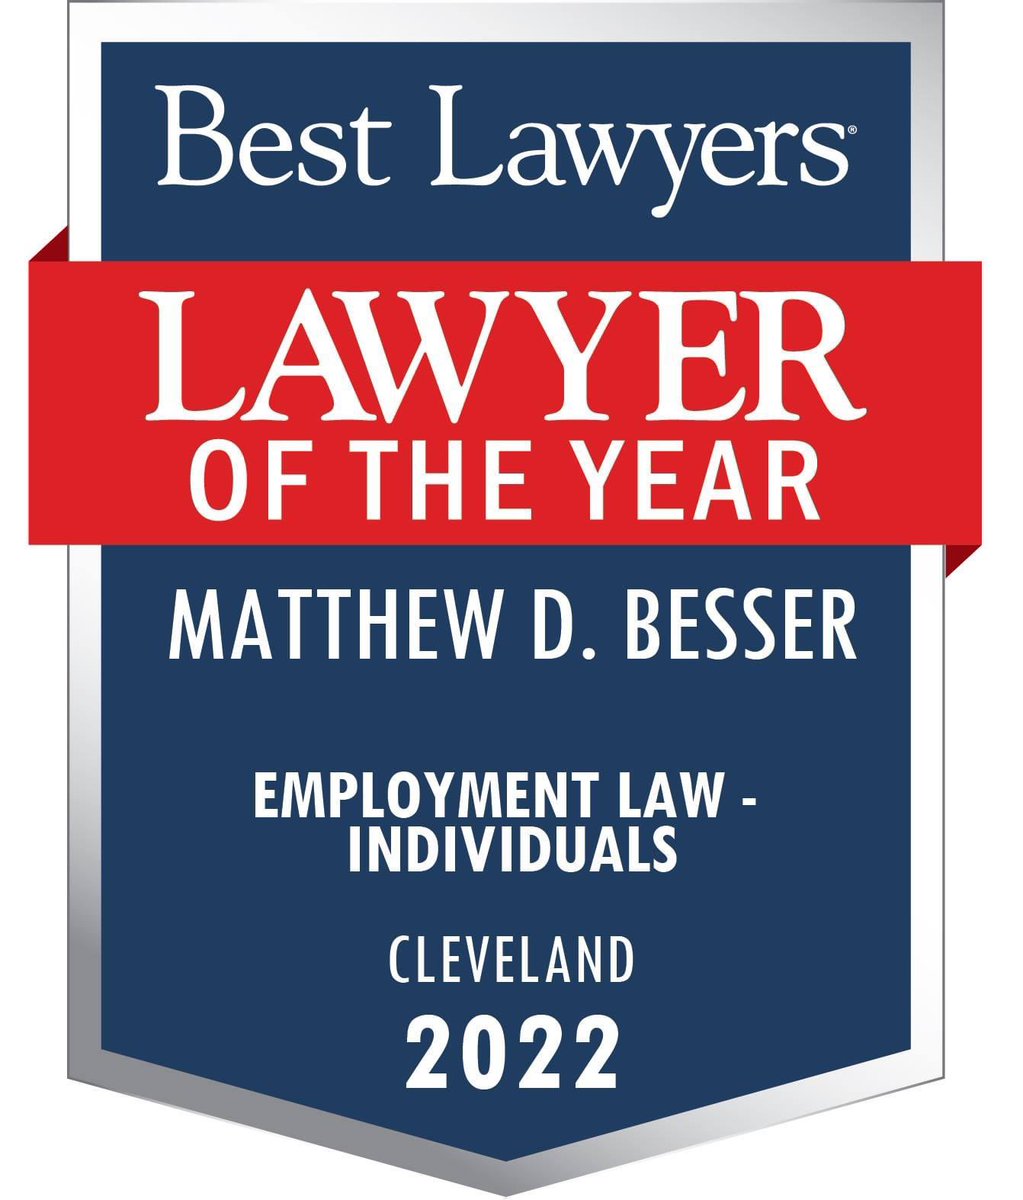 @BestLawyers names Matthew D. Besser the 2022 #Cleveland “Lawyer of the Year” for employment law representing individuals.

Find out more: bbgohio.com/blog/besser-na…

#bestlawyers #lawyeroftheyear #discriminationattorney #wrongfulterminationattorney #employmentlaw